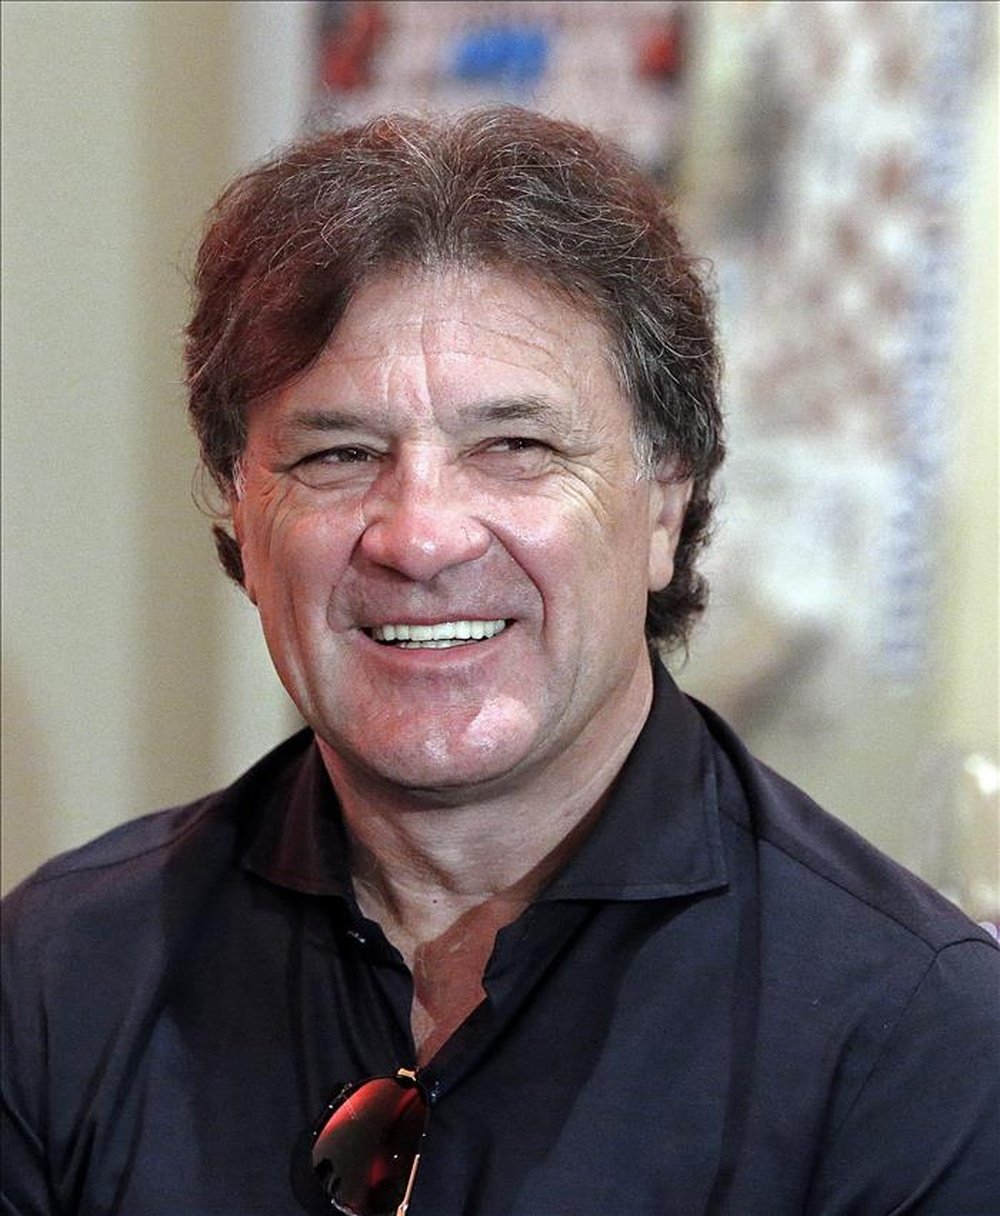 Zdravko Mamic and his brother Zoran, the coach of the team, were released on bail in July. EFE